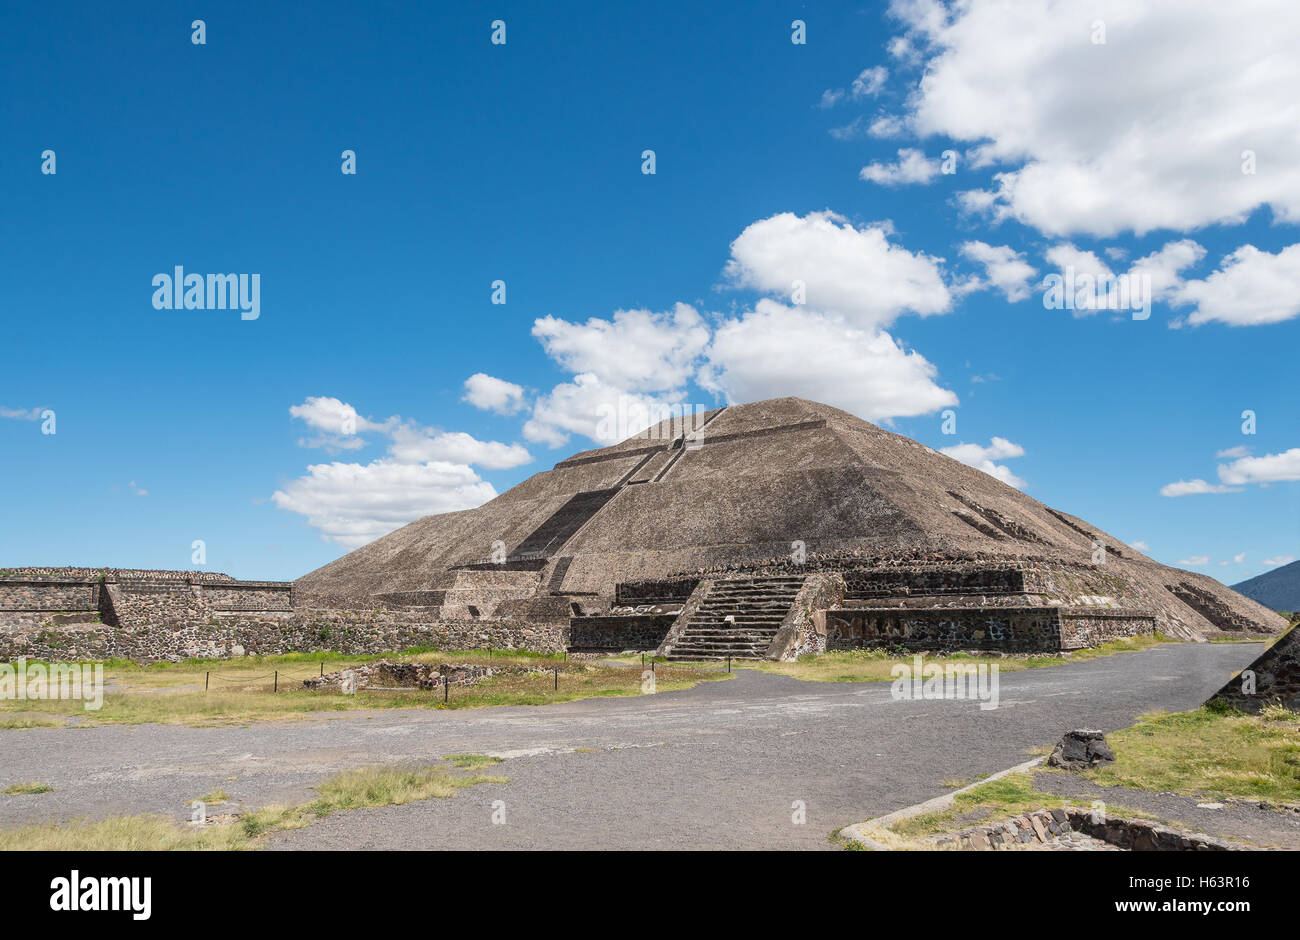 The Pyramid of the Sun is the largest pyramid in Teotihuacan and one of the largest in Mesoamerica. Stock Photo